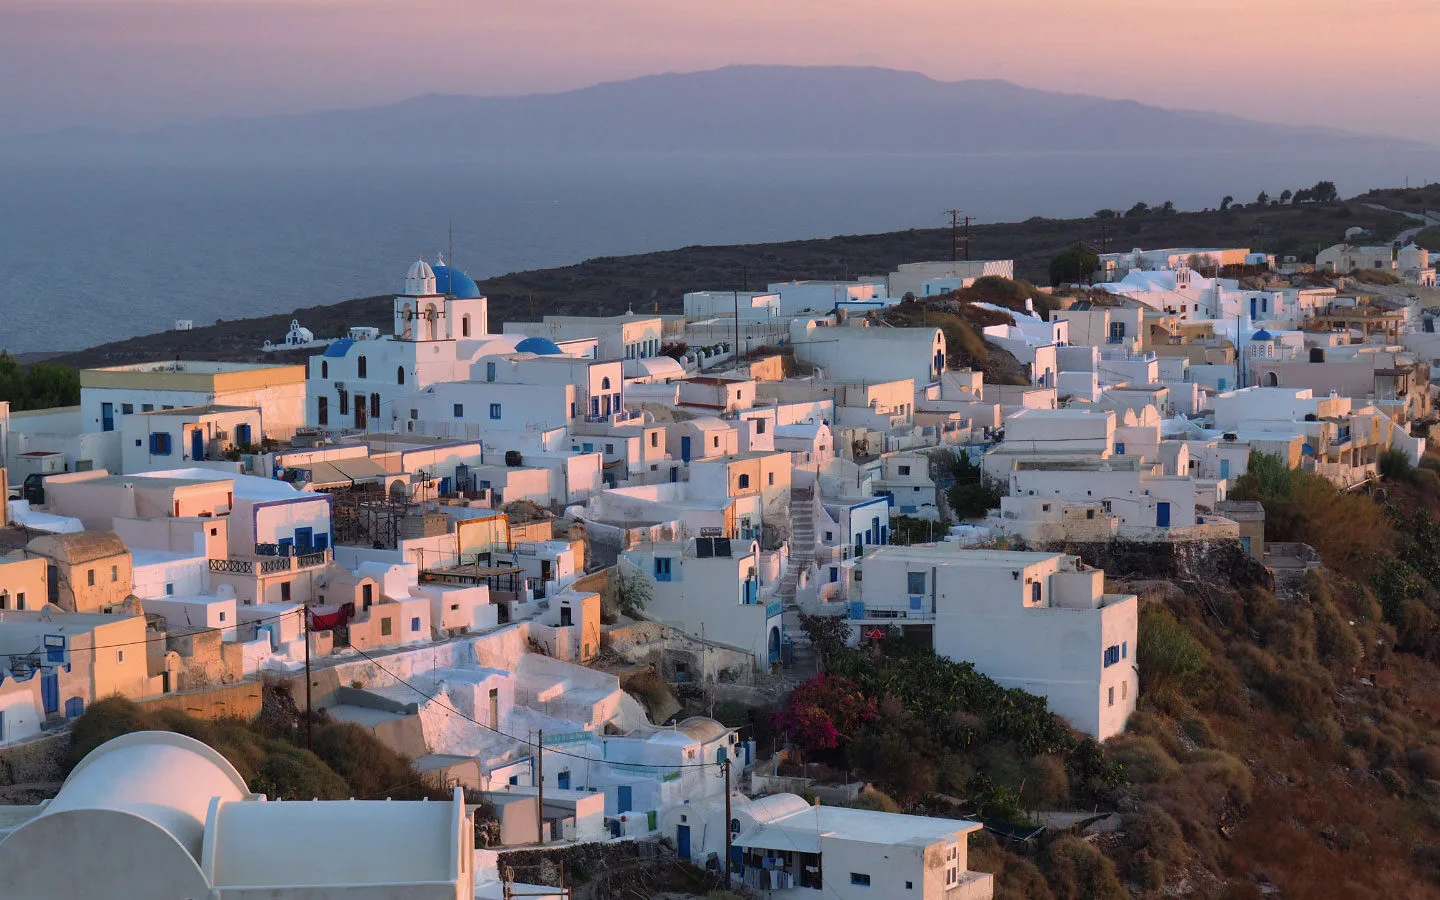 The town of Manolas on Thirassia day trips in Santorini